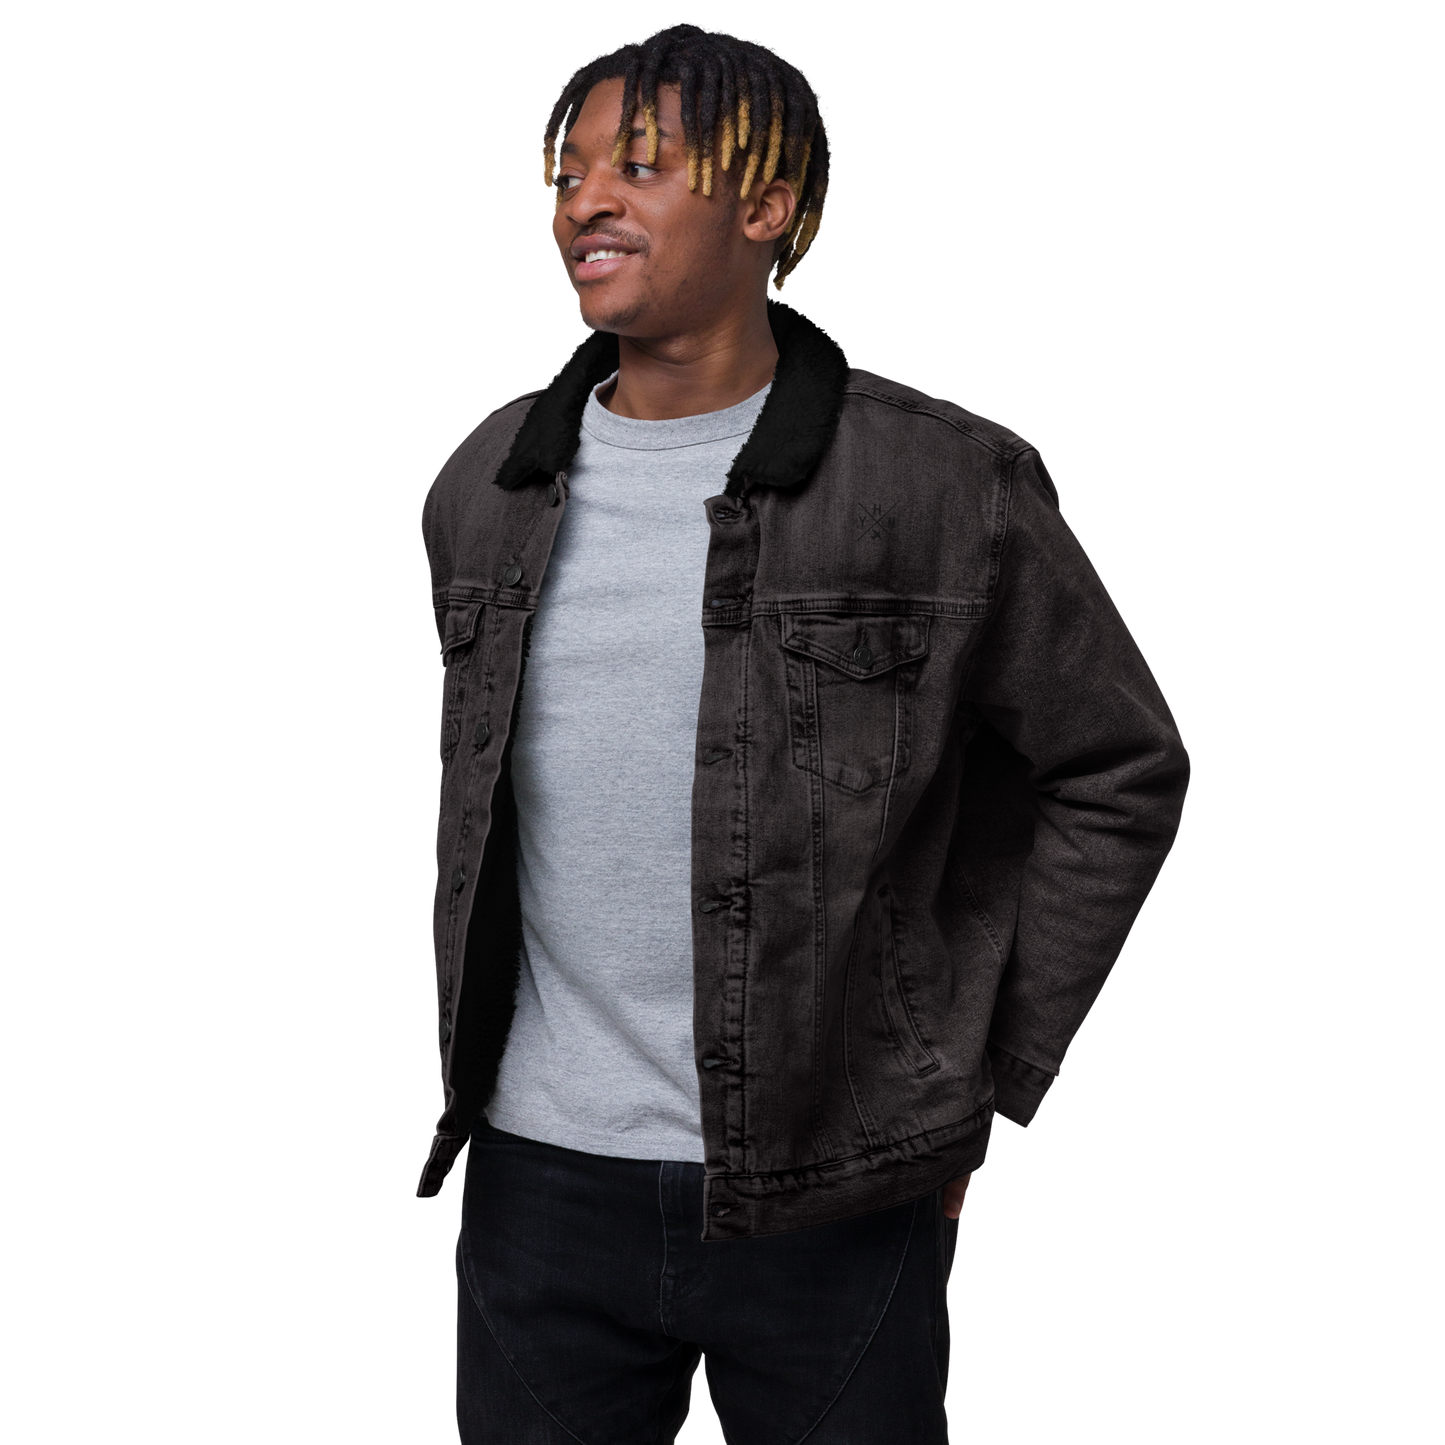 YHM Designs - YHM Hamilton Denim Sherpa Jacket - Crossed-X Design with Airport Code and Vintage Propliner - Black & White Embroidery - Image 08